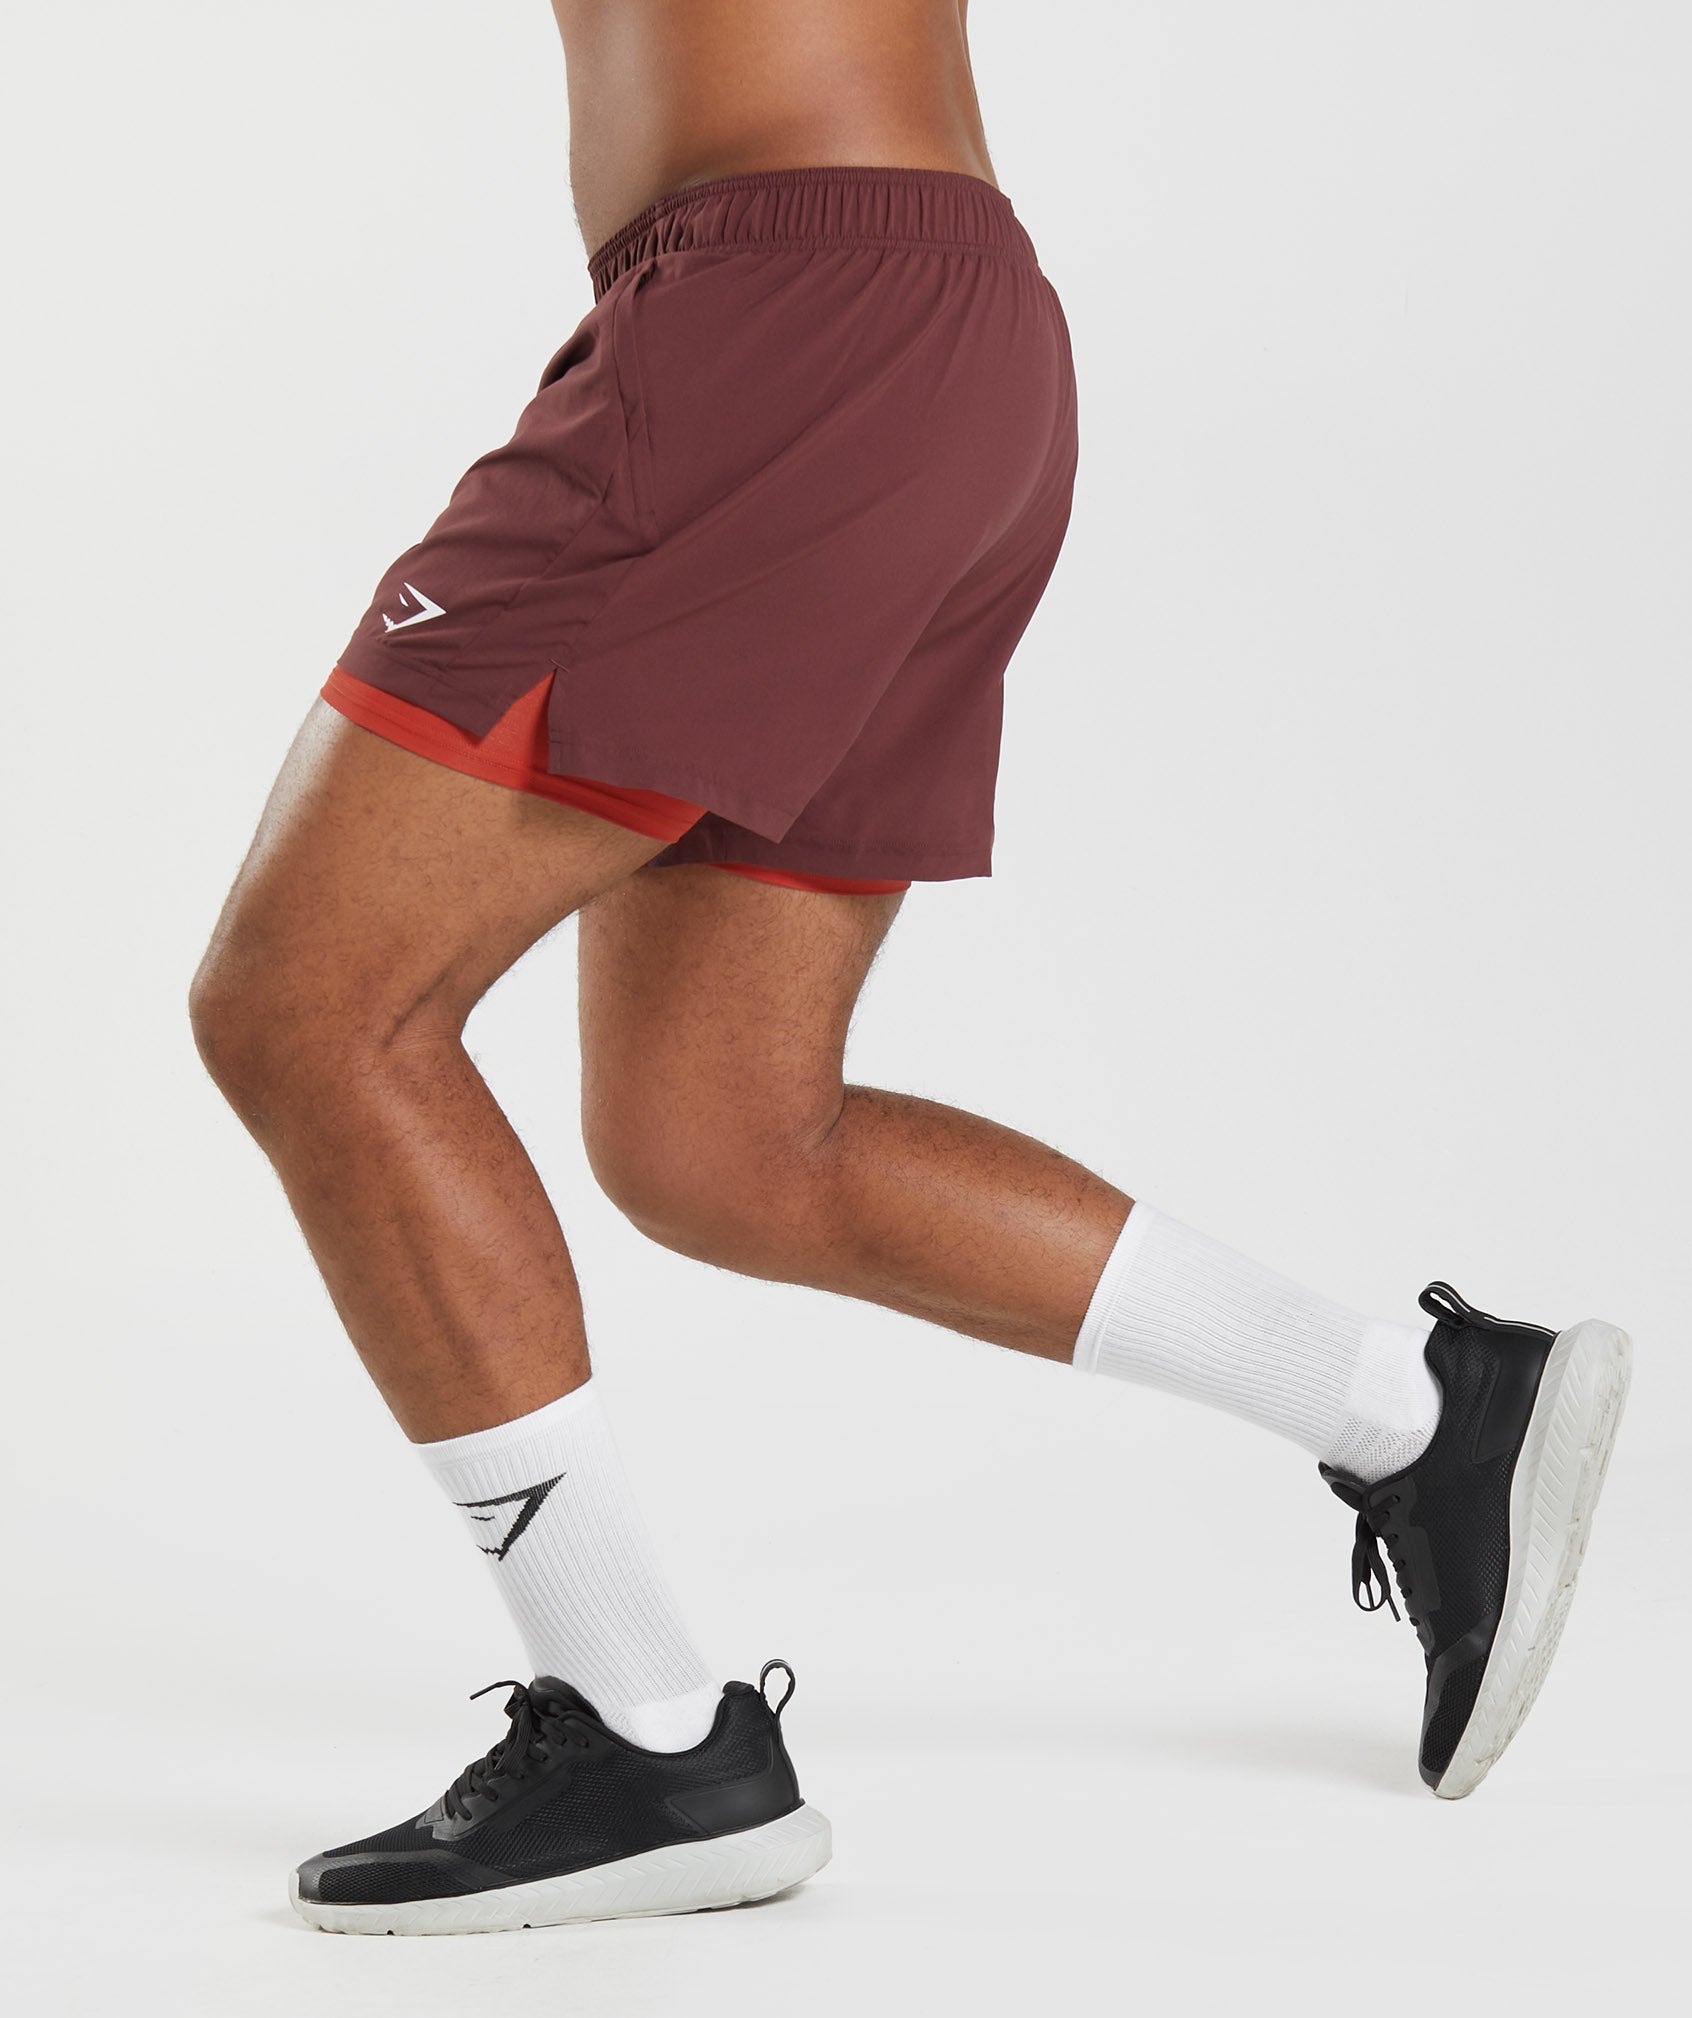 Sport 5" 2 In 1 Shorts in Baked Maroon/Salsa Red - view 3